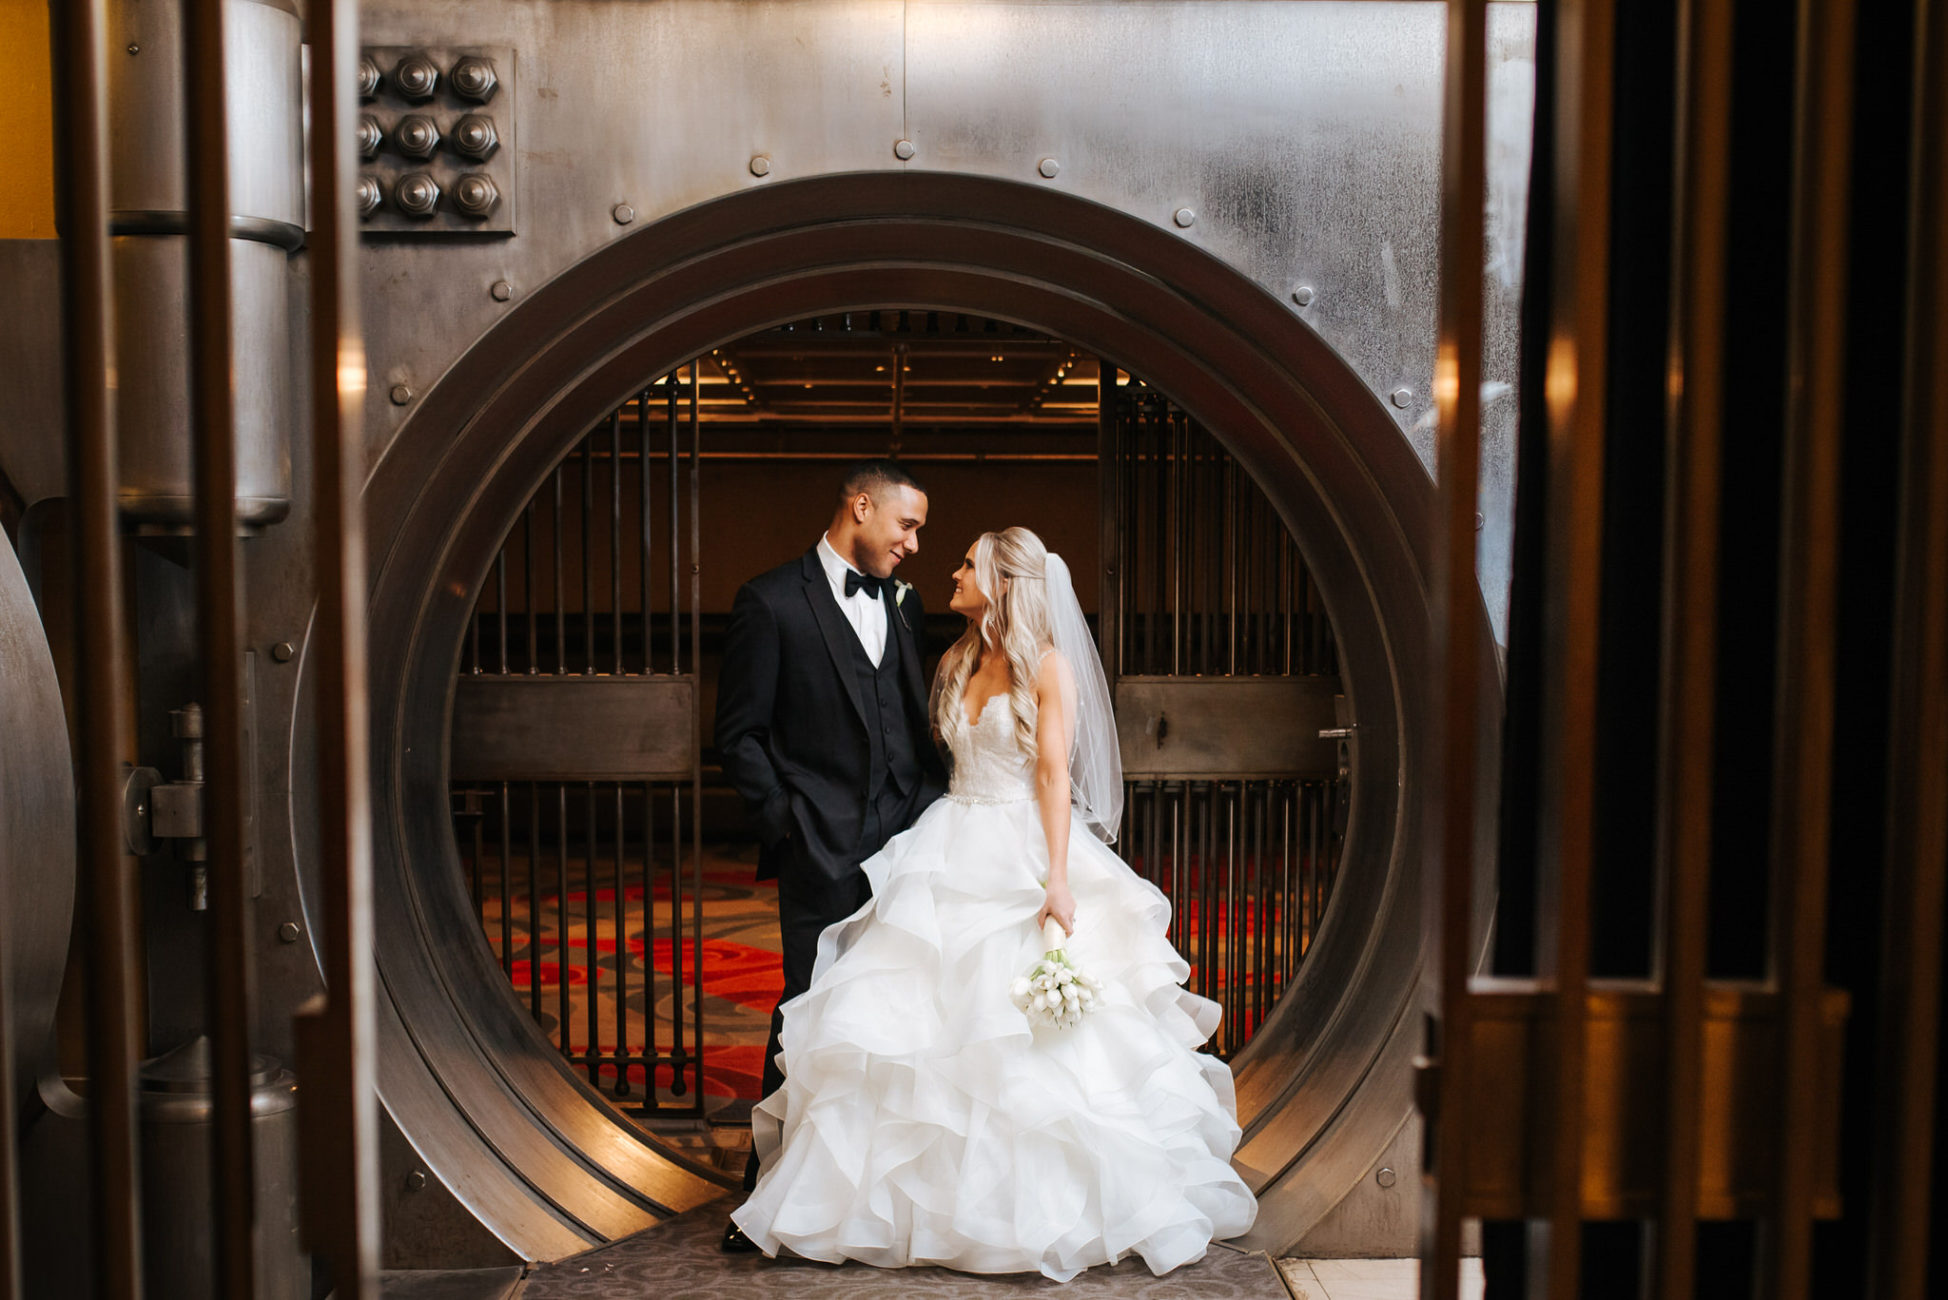 One King Toronto New Years Eve Wedding - portrait in the vault